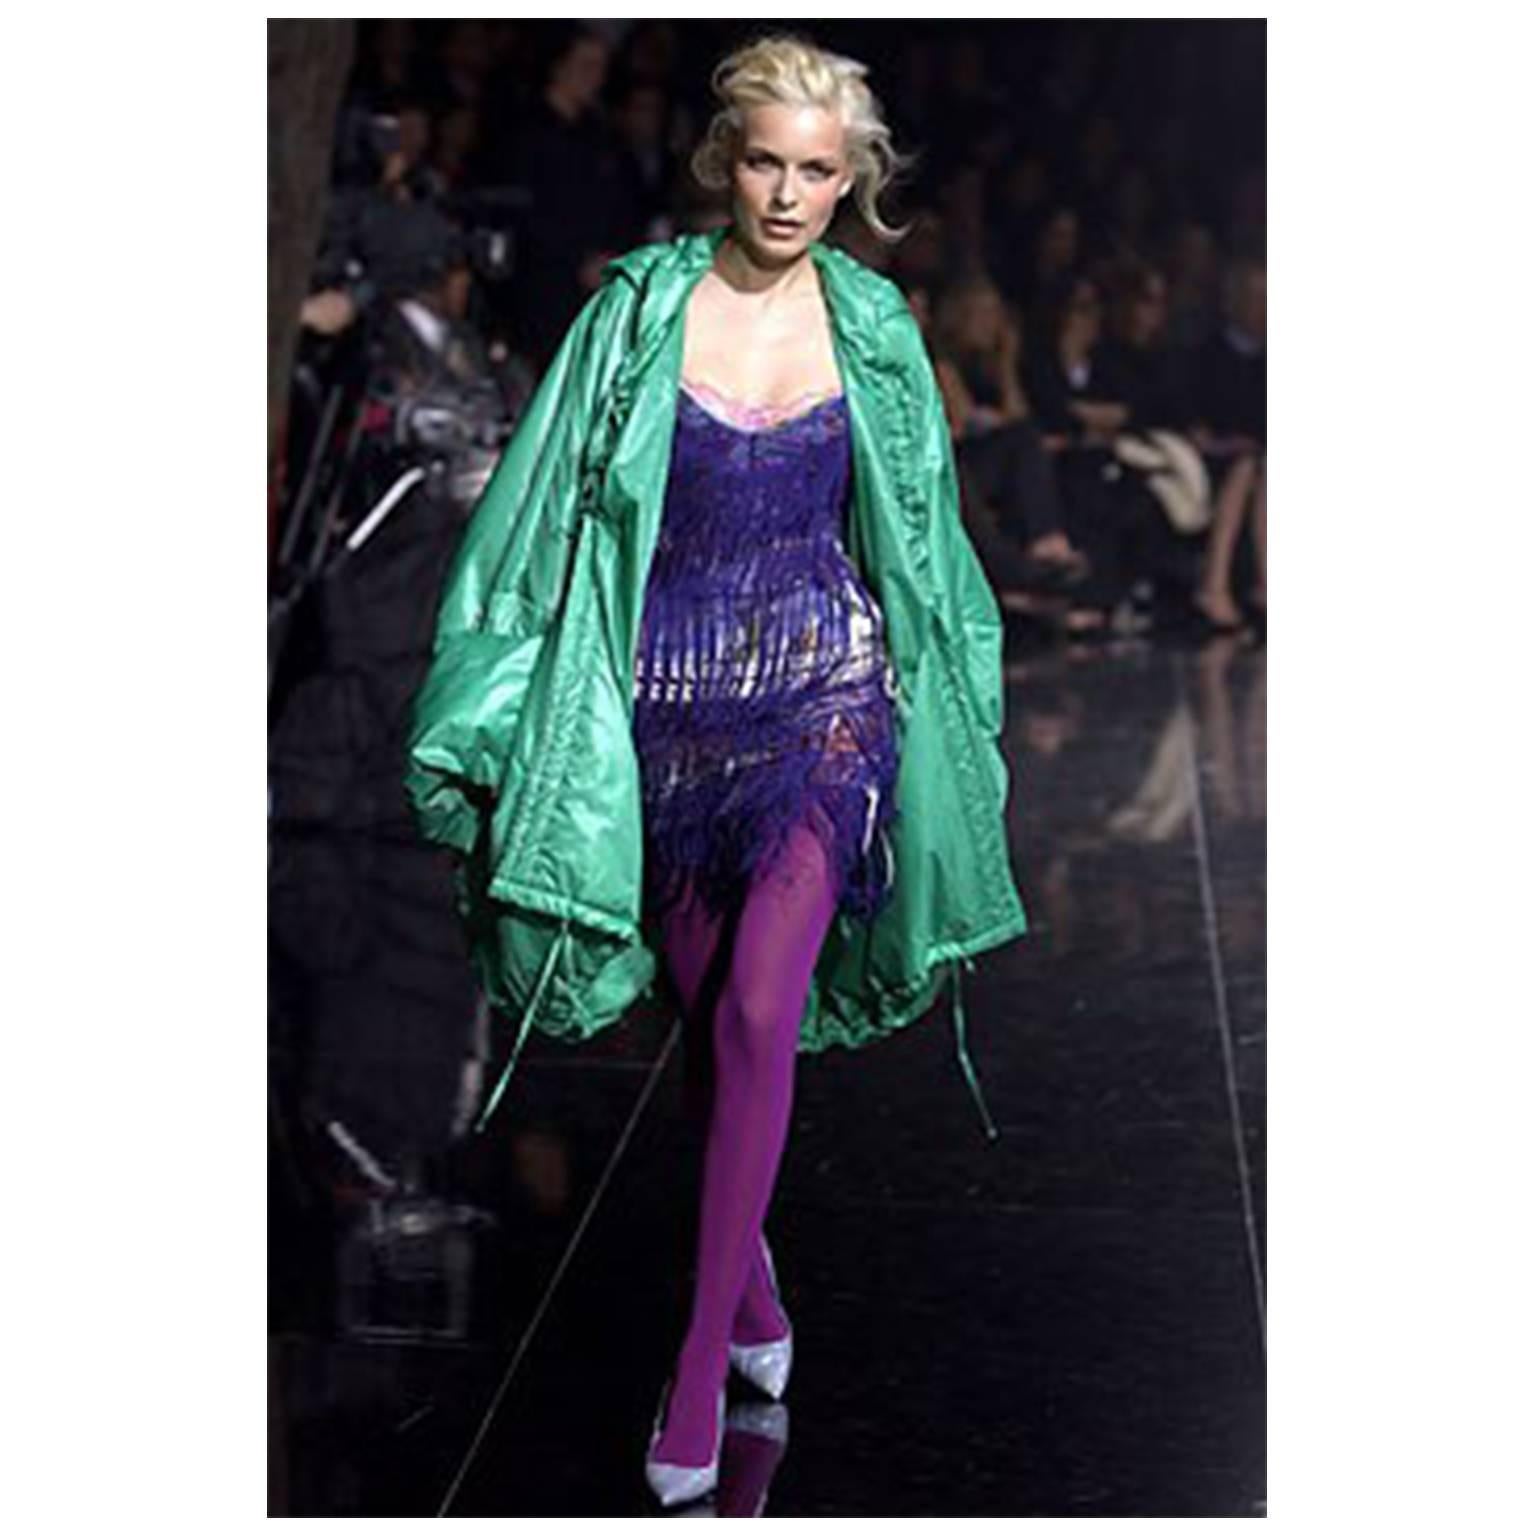 Stunning purple fringe Dolce & Gabbana party dress with floral under body and corset sides. Collection 2003. 